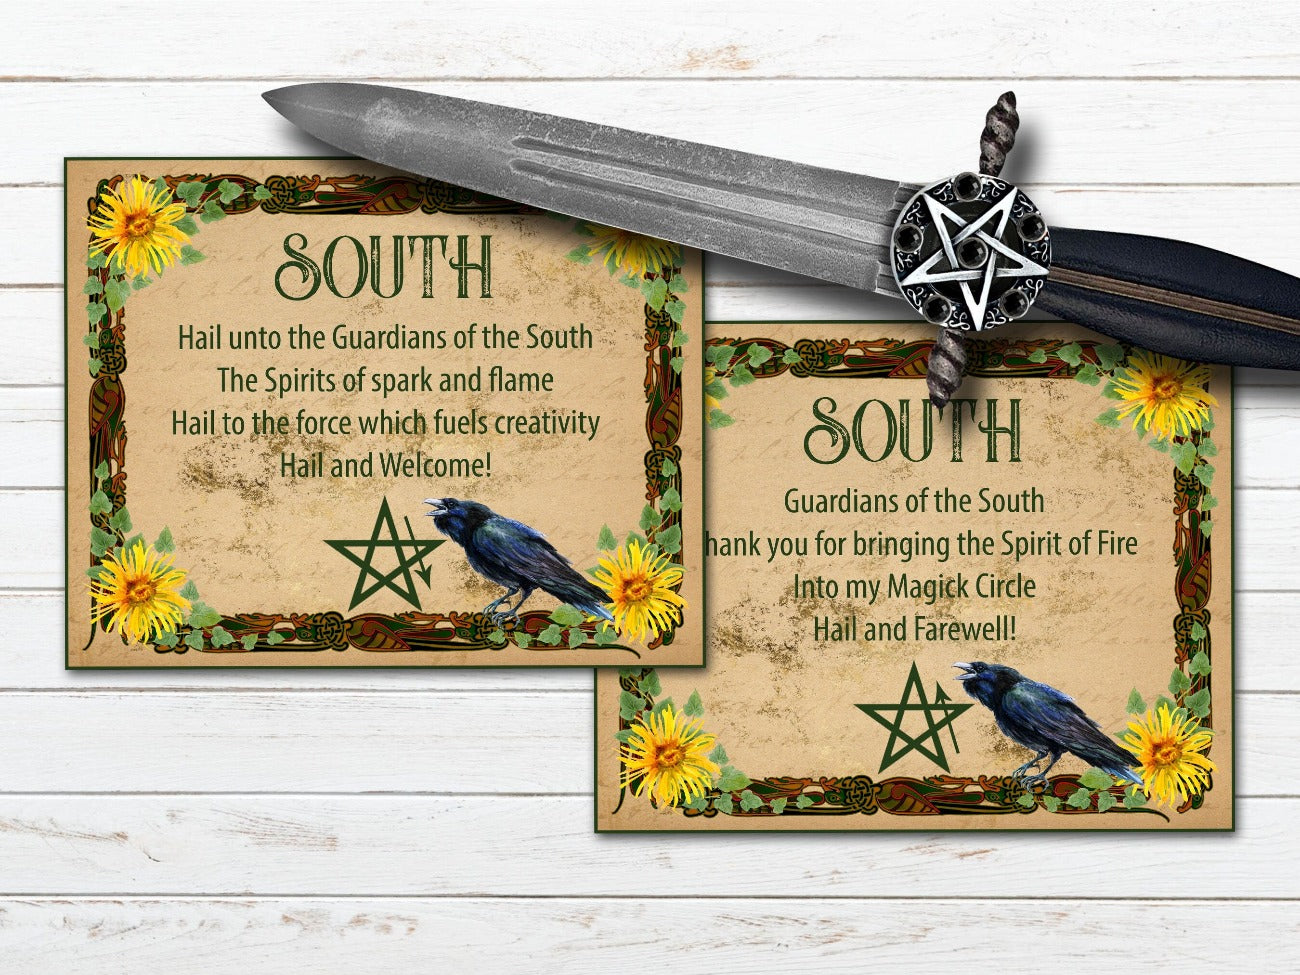 South Invoking and Banishing Quarter Cards. Each card has a floral border with a crow and pentacle with an arrow indicating the correct way to draw it.